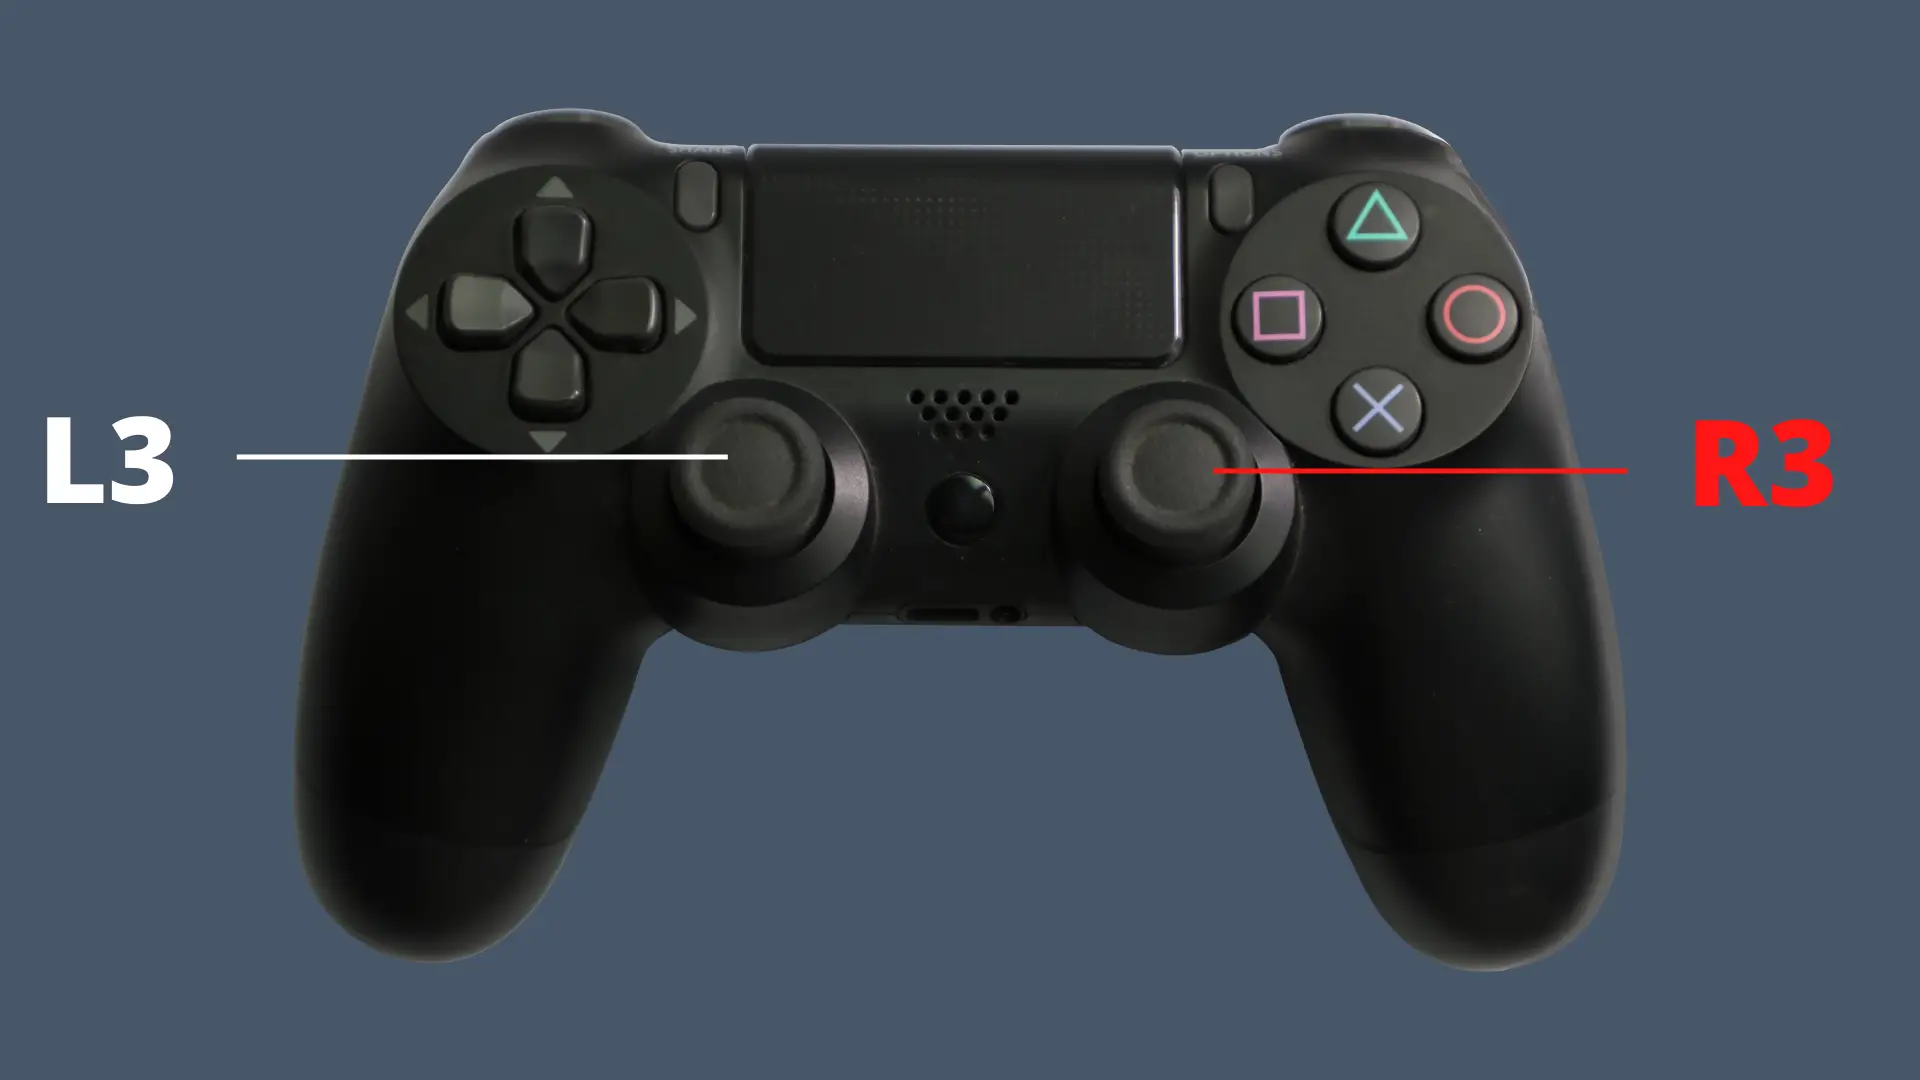 where-is-r3-on-a-ps4-controller-decortweaks